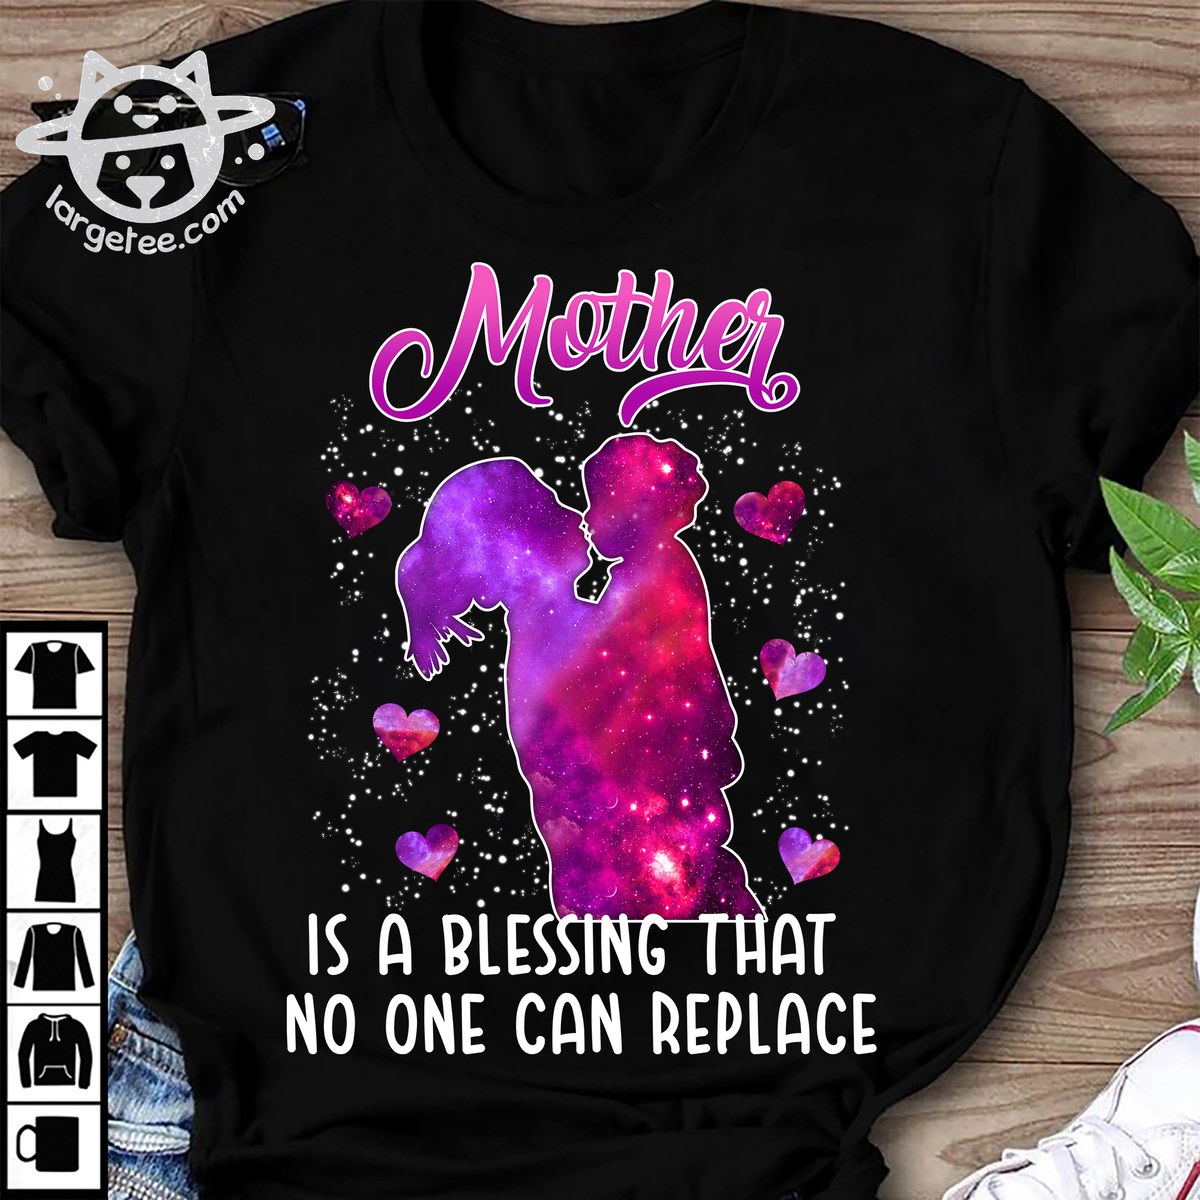 Mother is a blessing that no one can replace